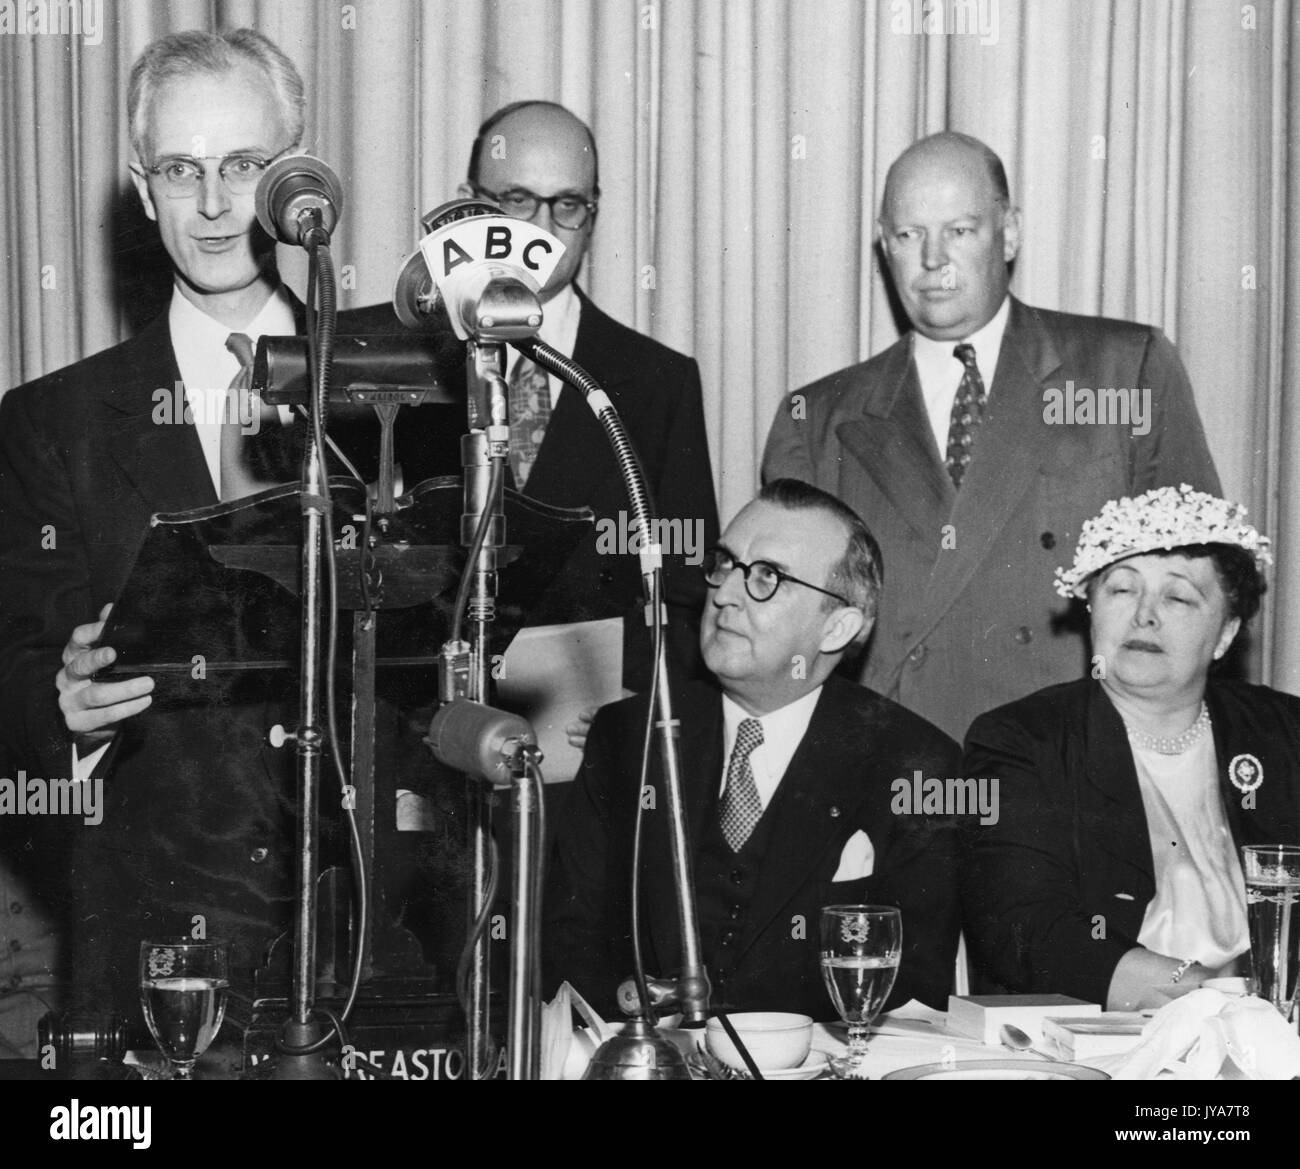 American television host Lynn Poole is standing at a special microphone with ABC printed on it, executives Ben Cohen and Dr Allen B DuMont are standing further behind him, other guests D Drewry and Dorothy Lewis are sitting in front of Cohen and DuMont, 1955. Stock Photo